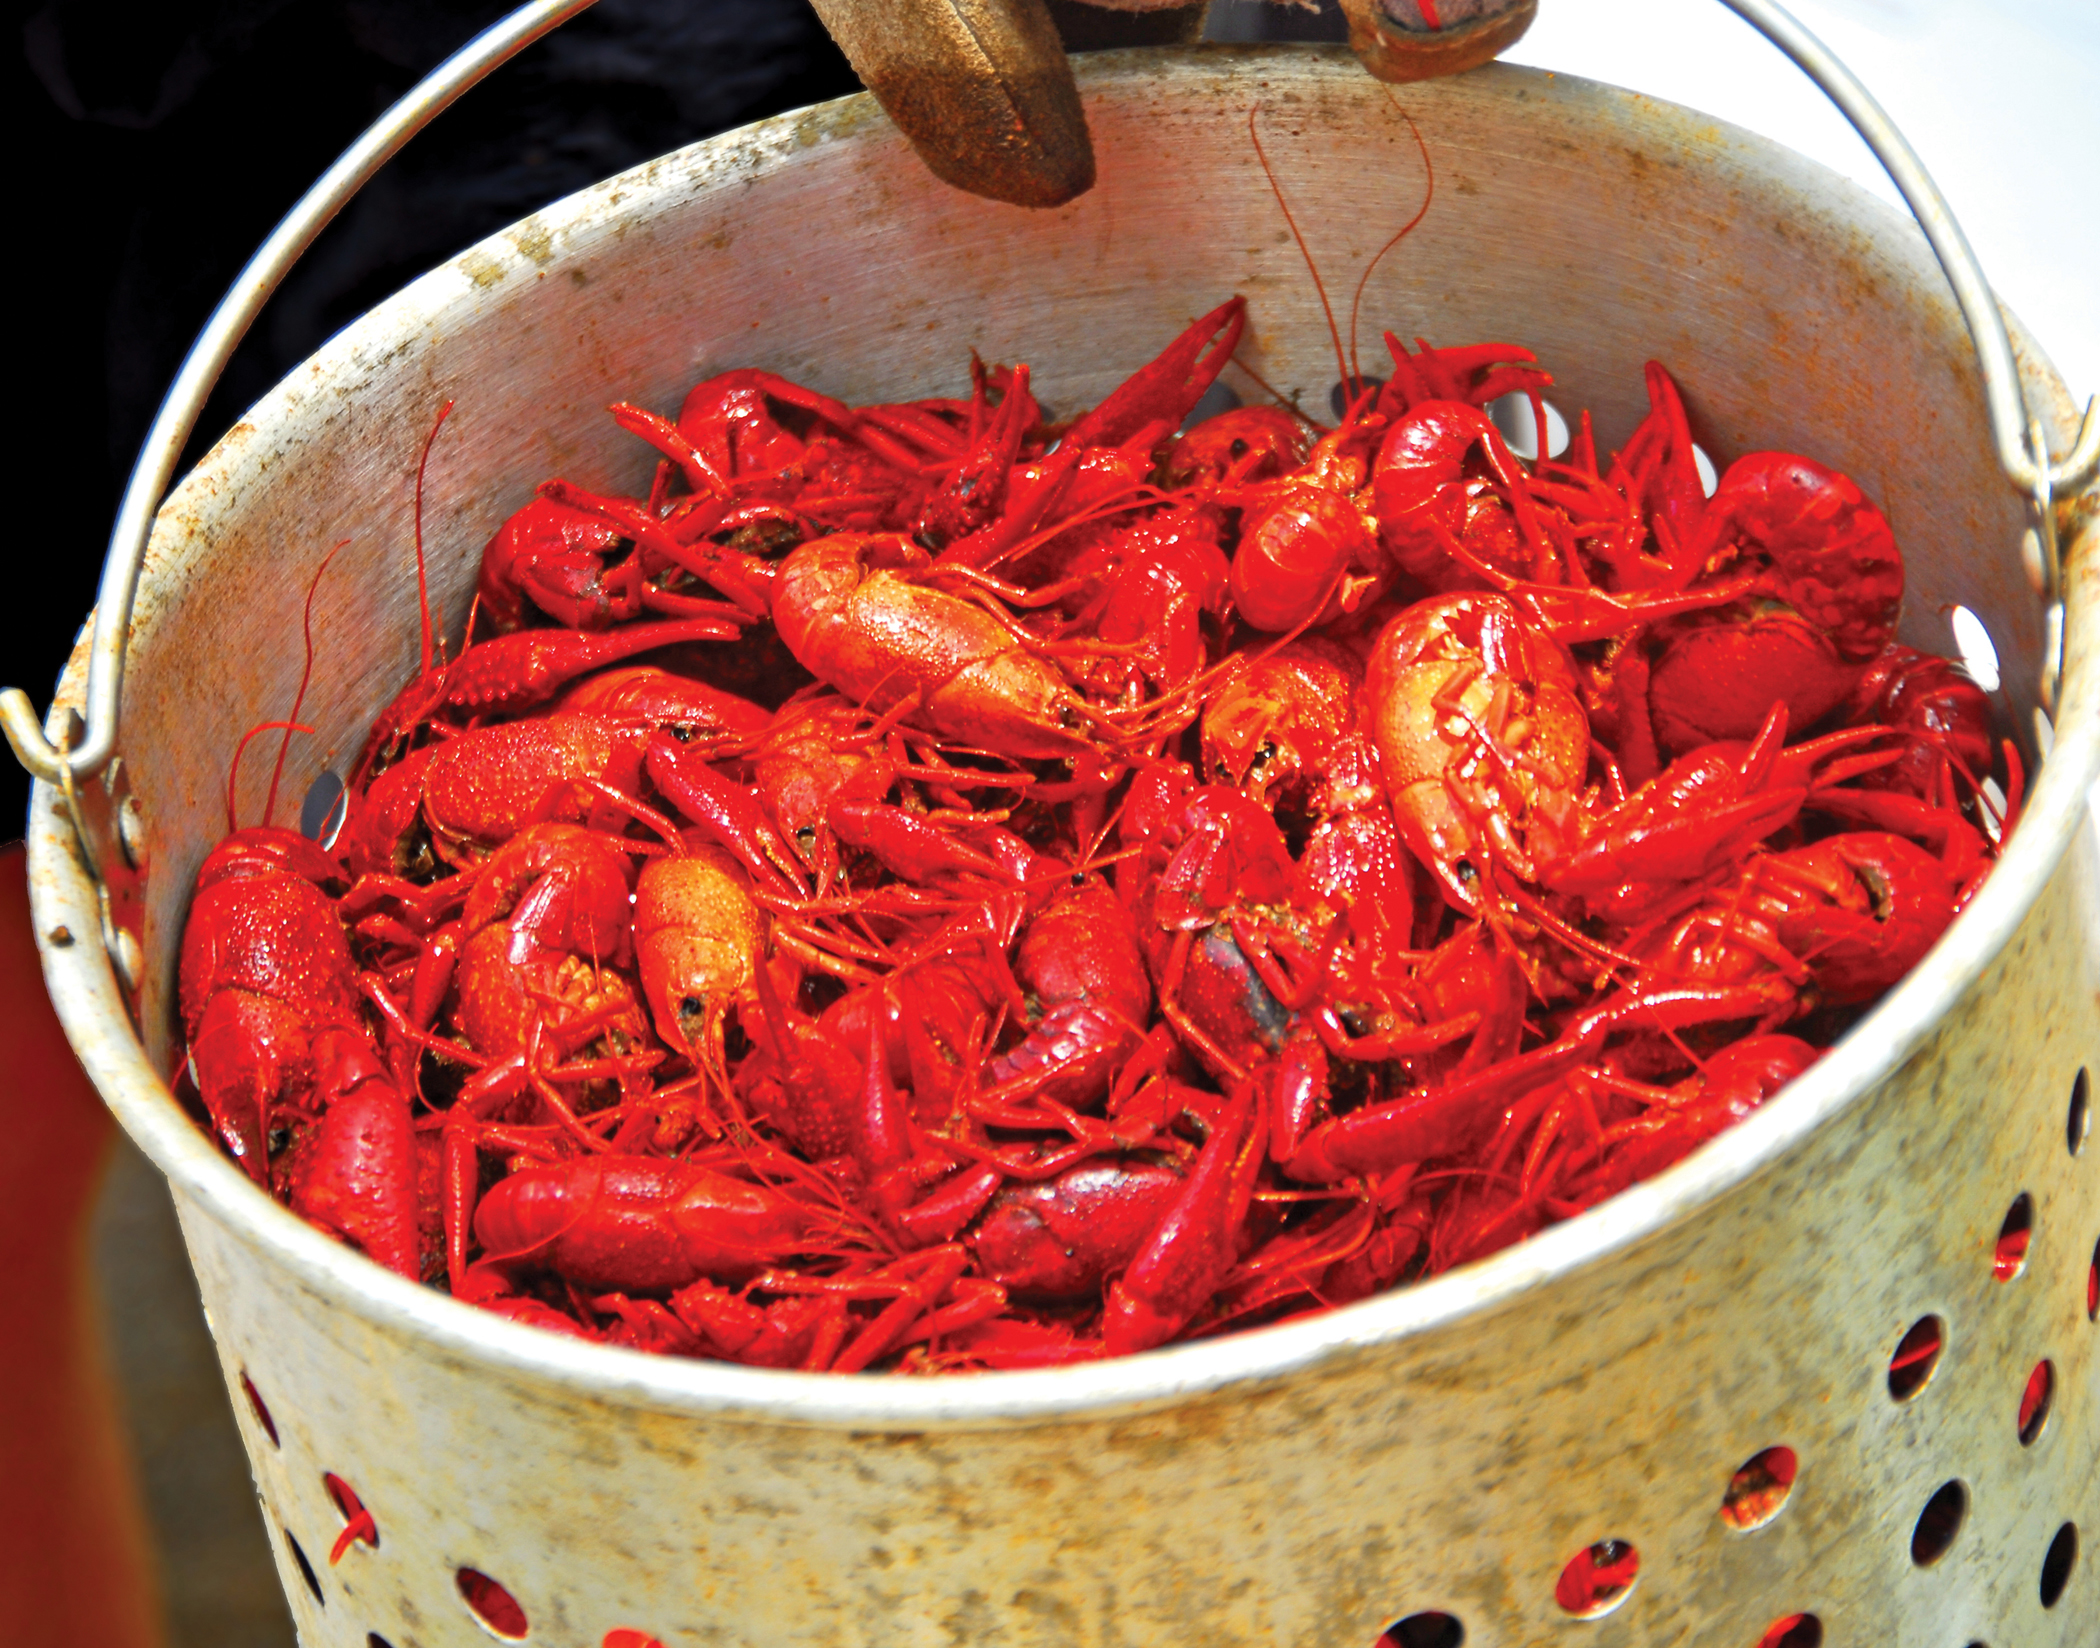 The 31st Annual Pensacola Crawfish Festival will feature more than 16,000 pounds of boiled mudbugs in May.